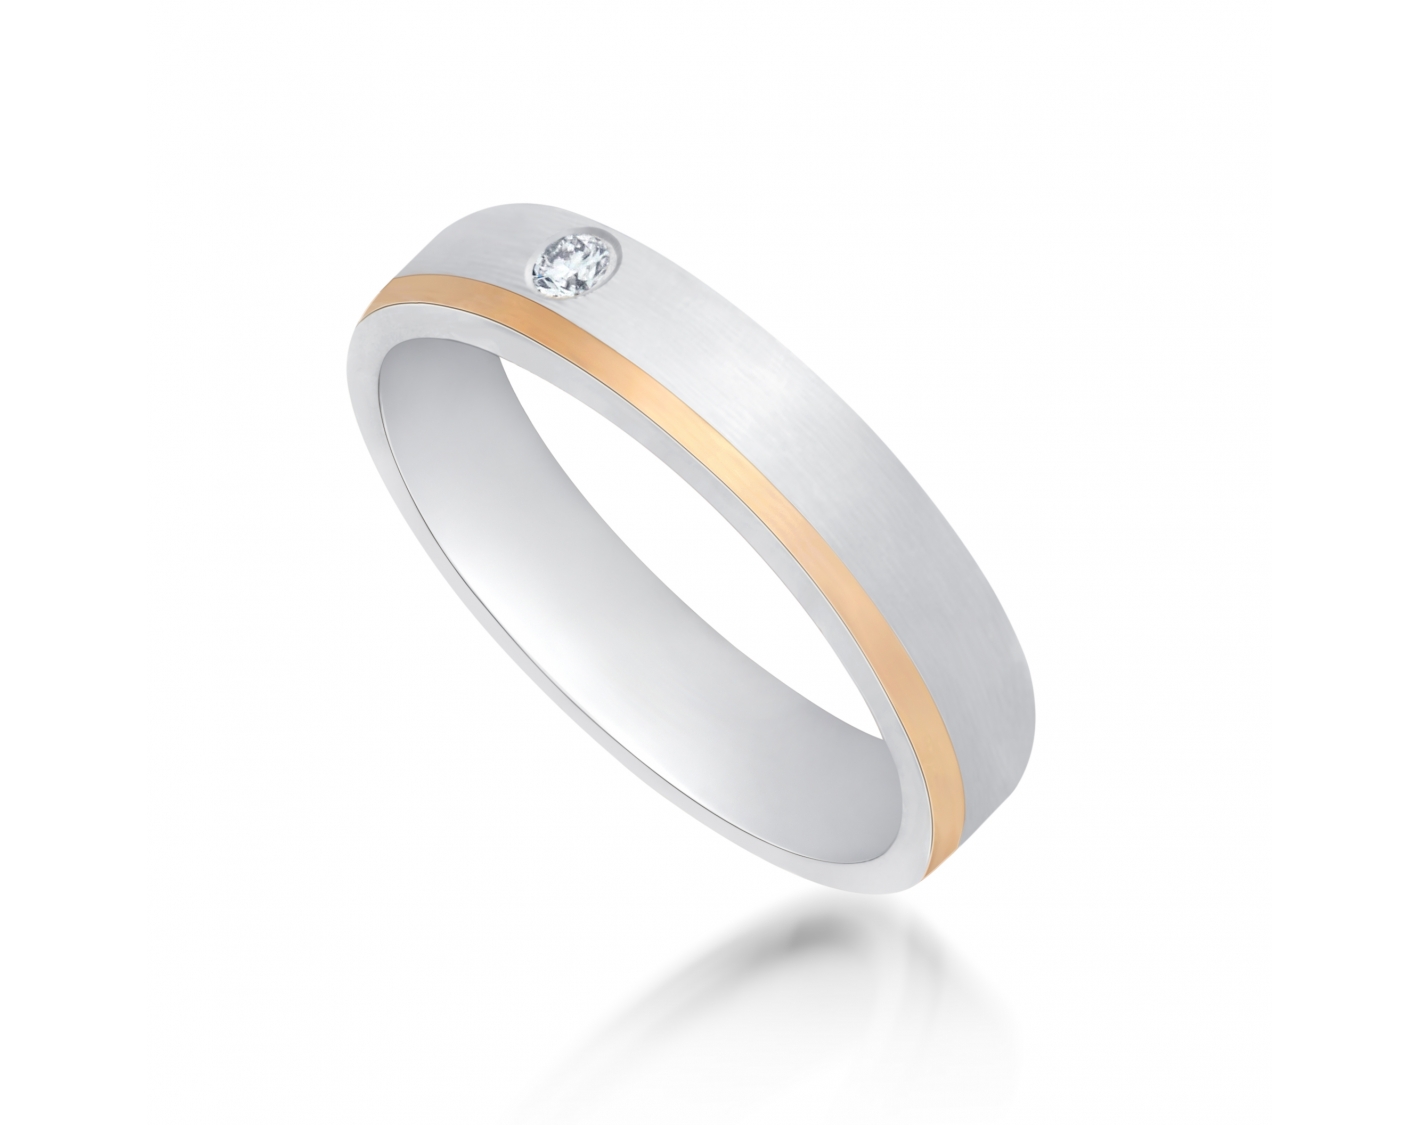 dual-tone 4mm two-toned* half round matte wedding ring set with a round diamond Photos & images